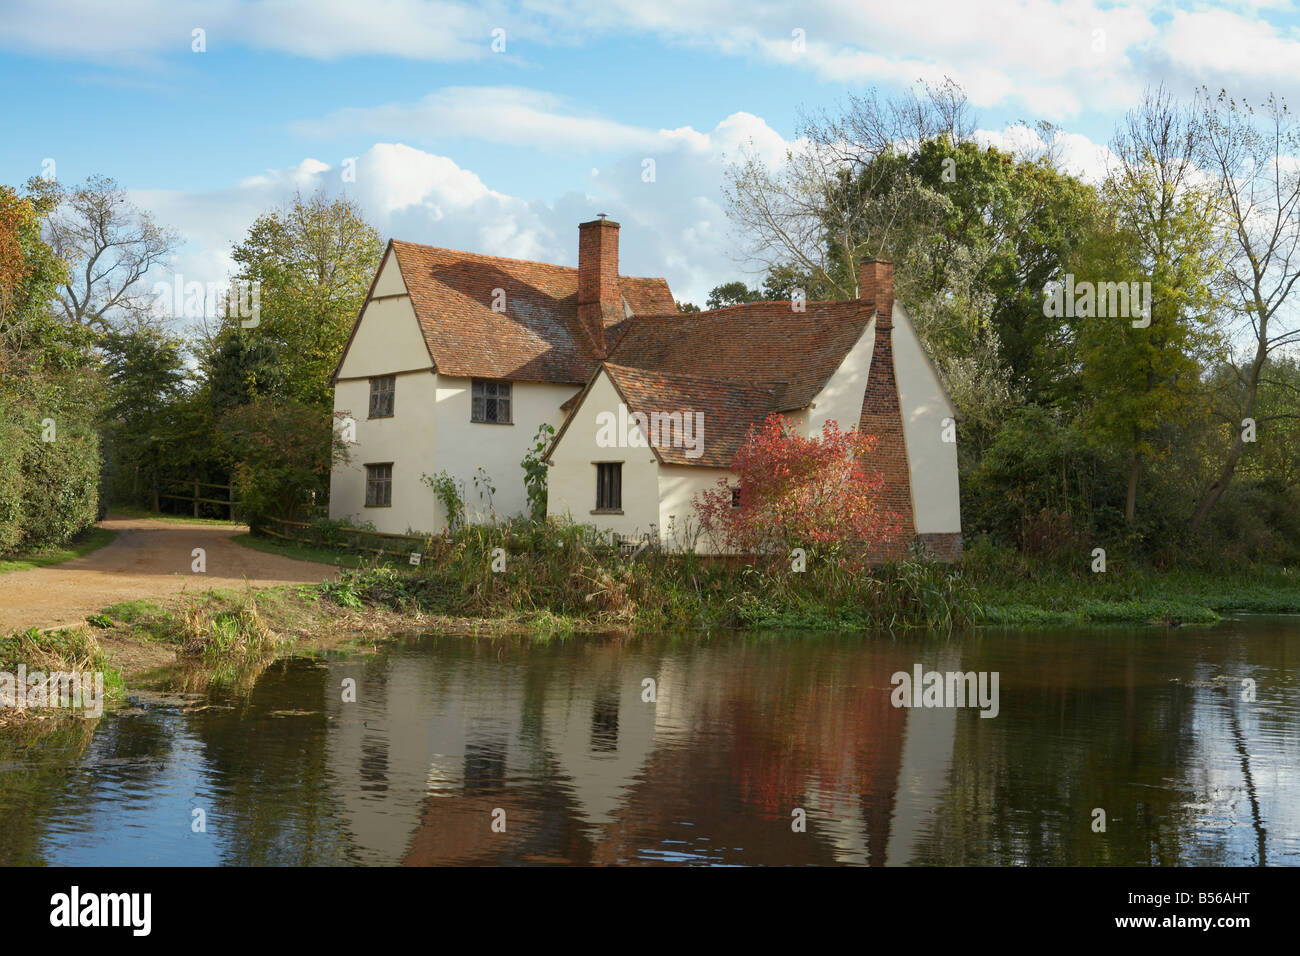 UK Angleterre Suffolk East Bergholt Willy Lotts Flatford John Constable Country Cottage Banque D'Images